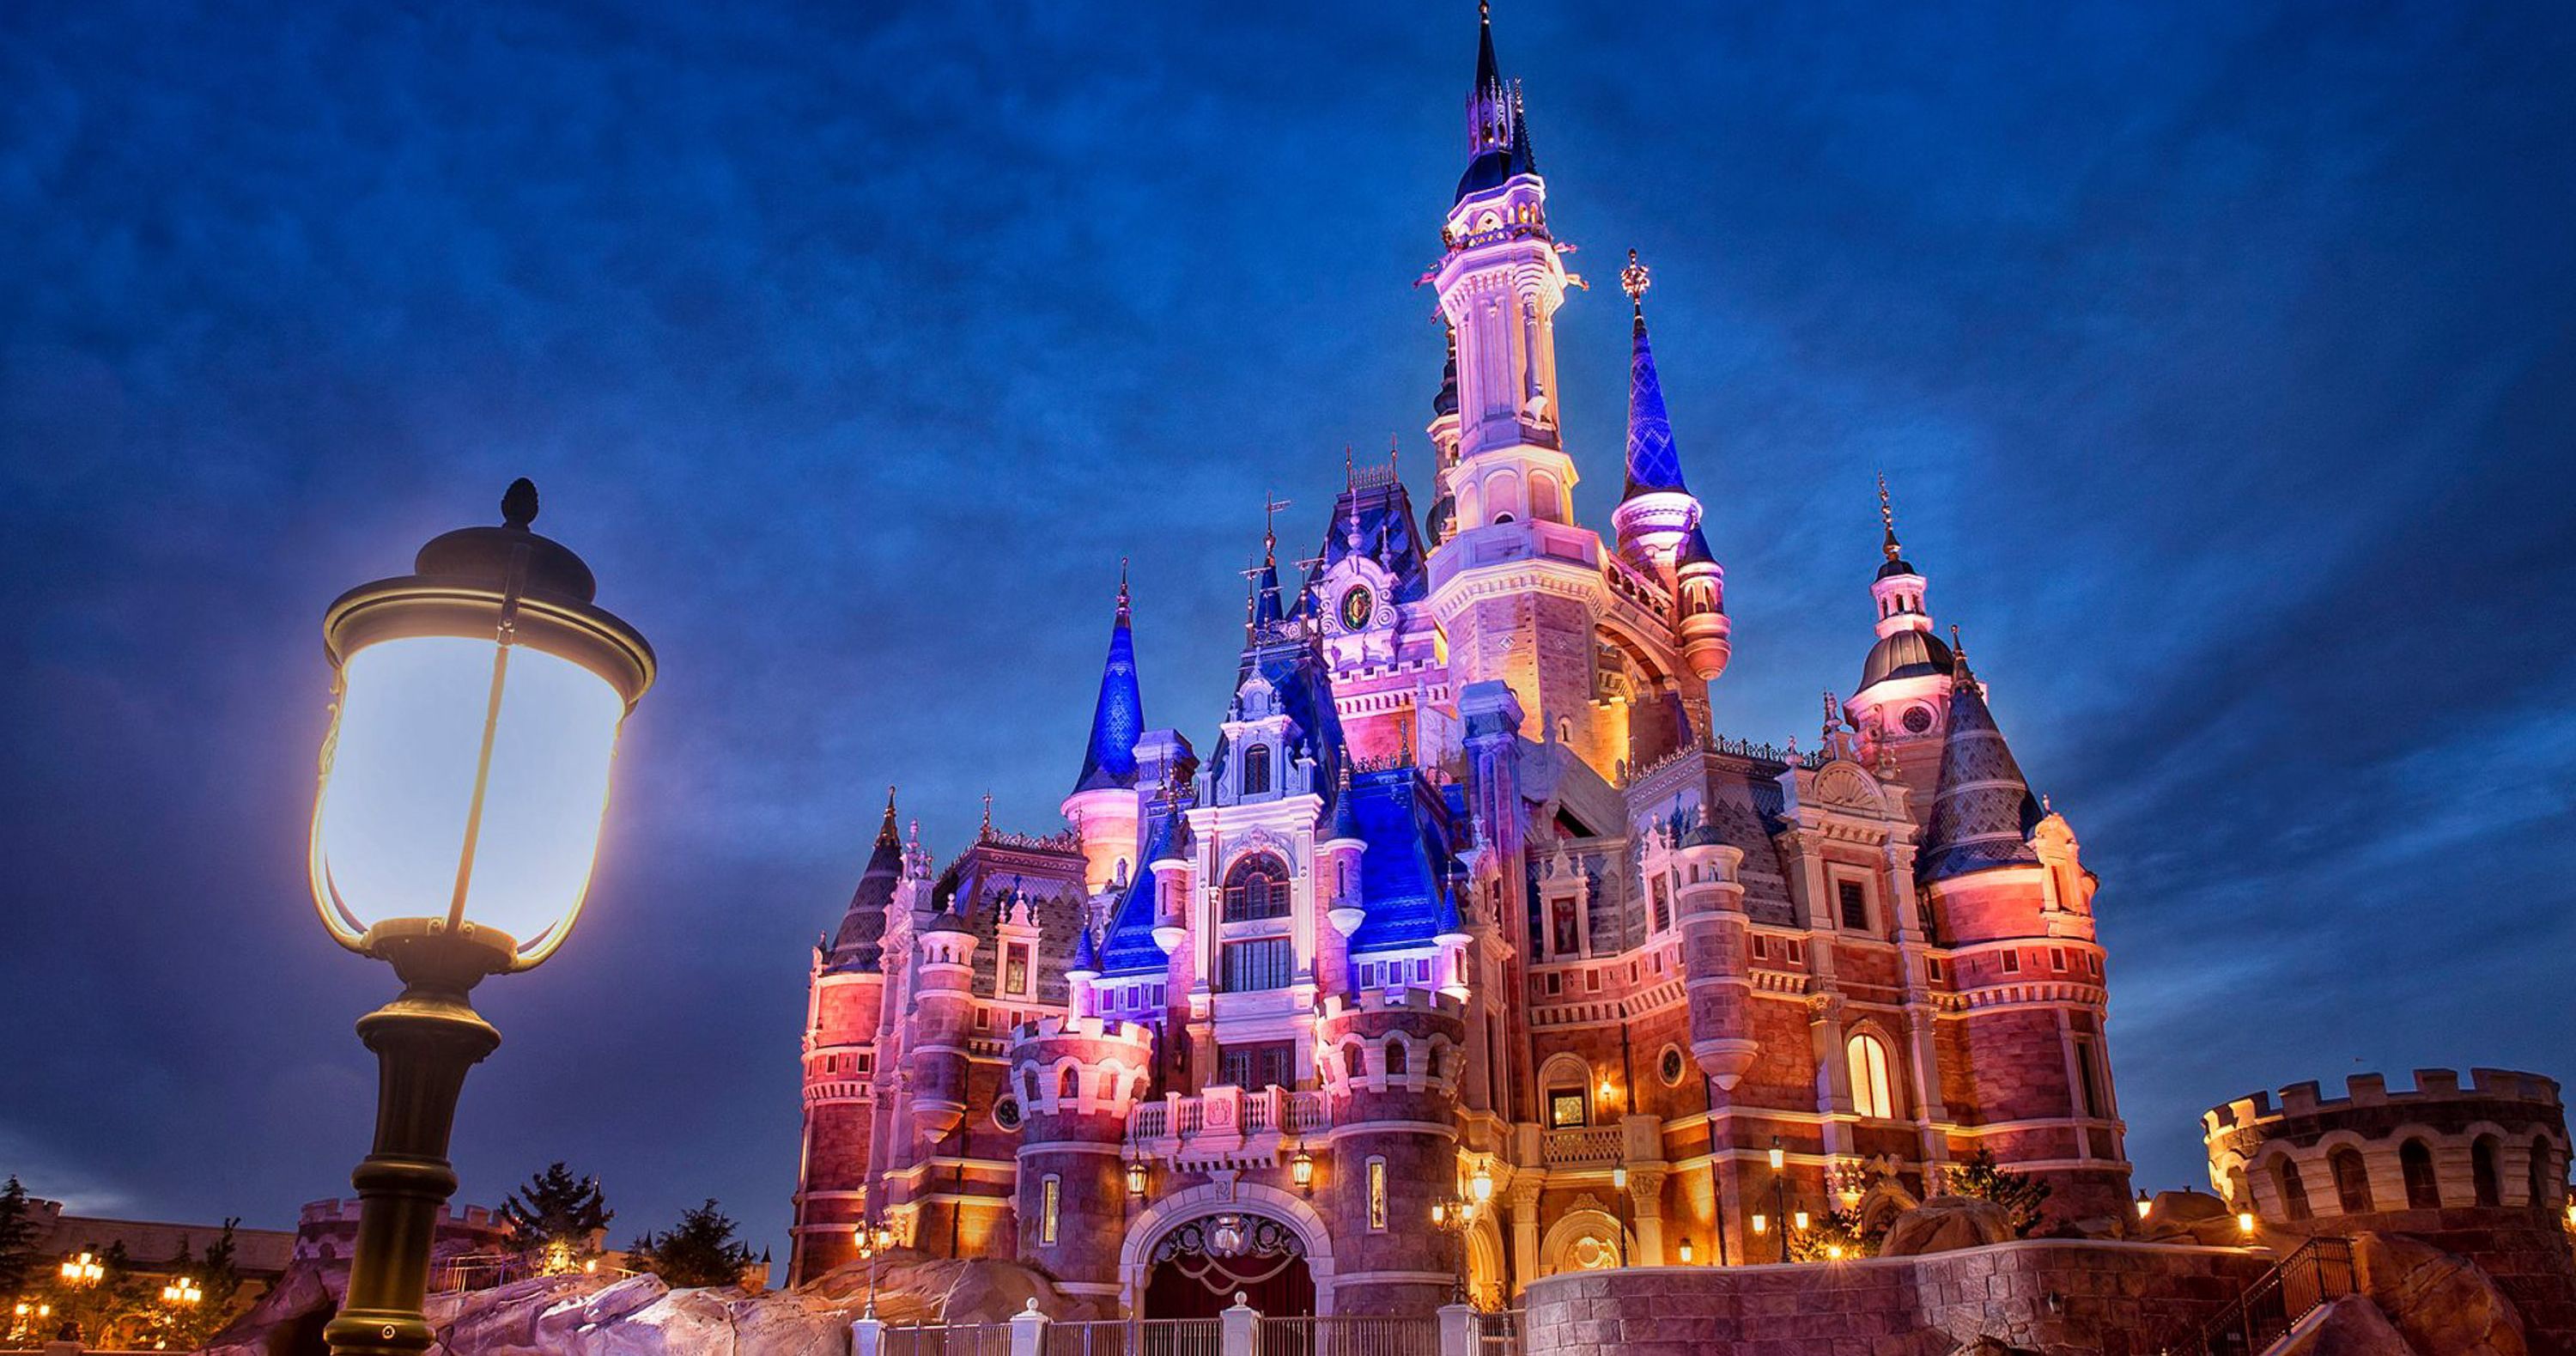 Shanghai Disneyland Will Reopen Next Week with Limited Attendance and Temperature Checks